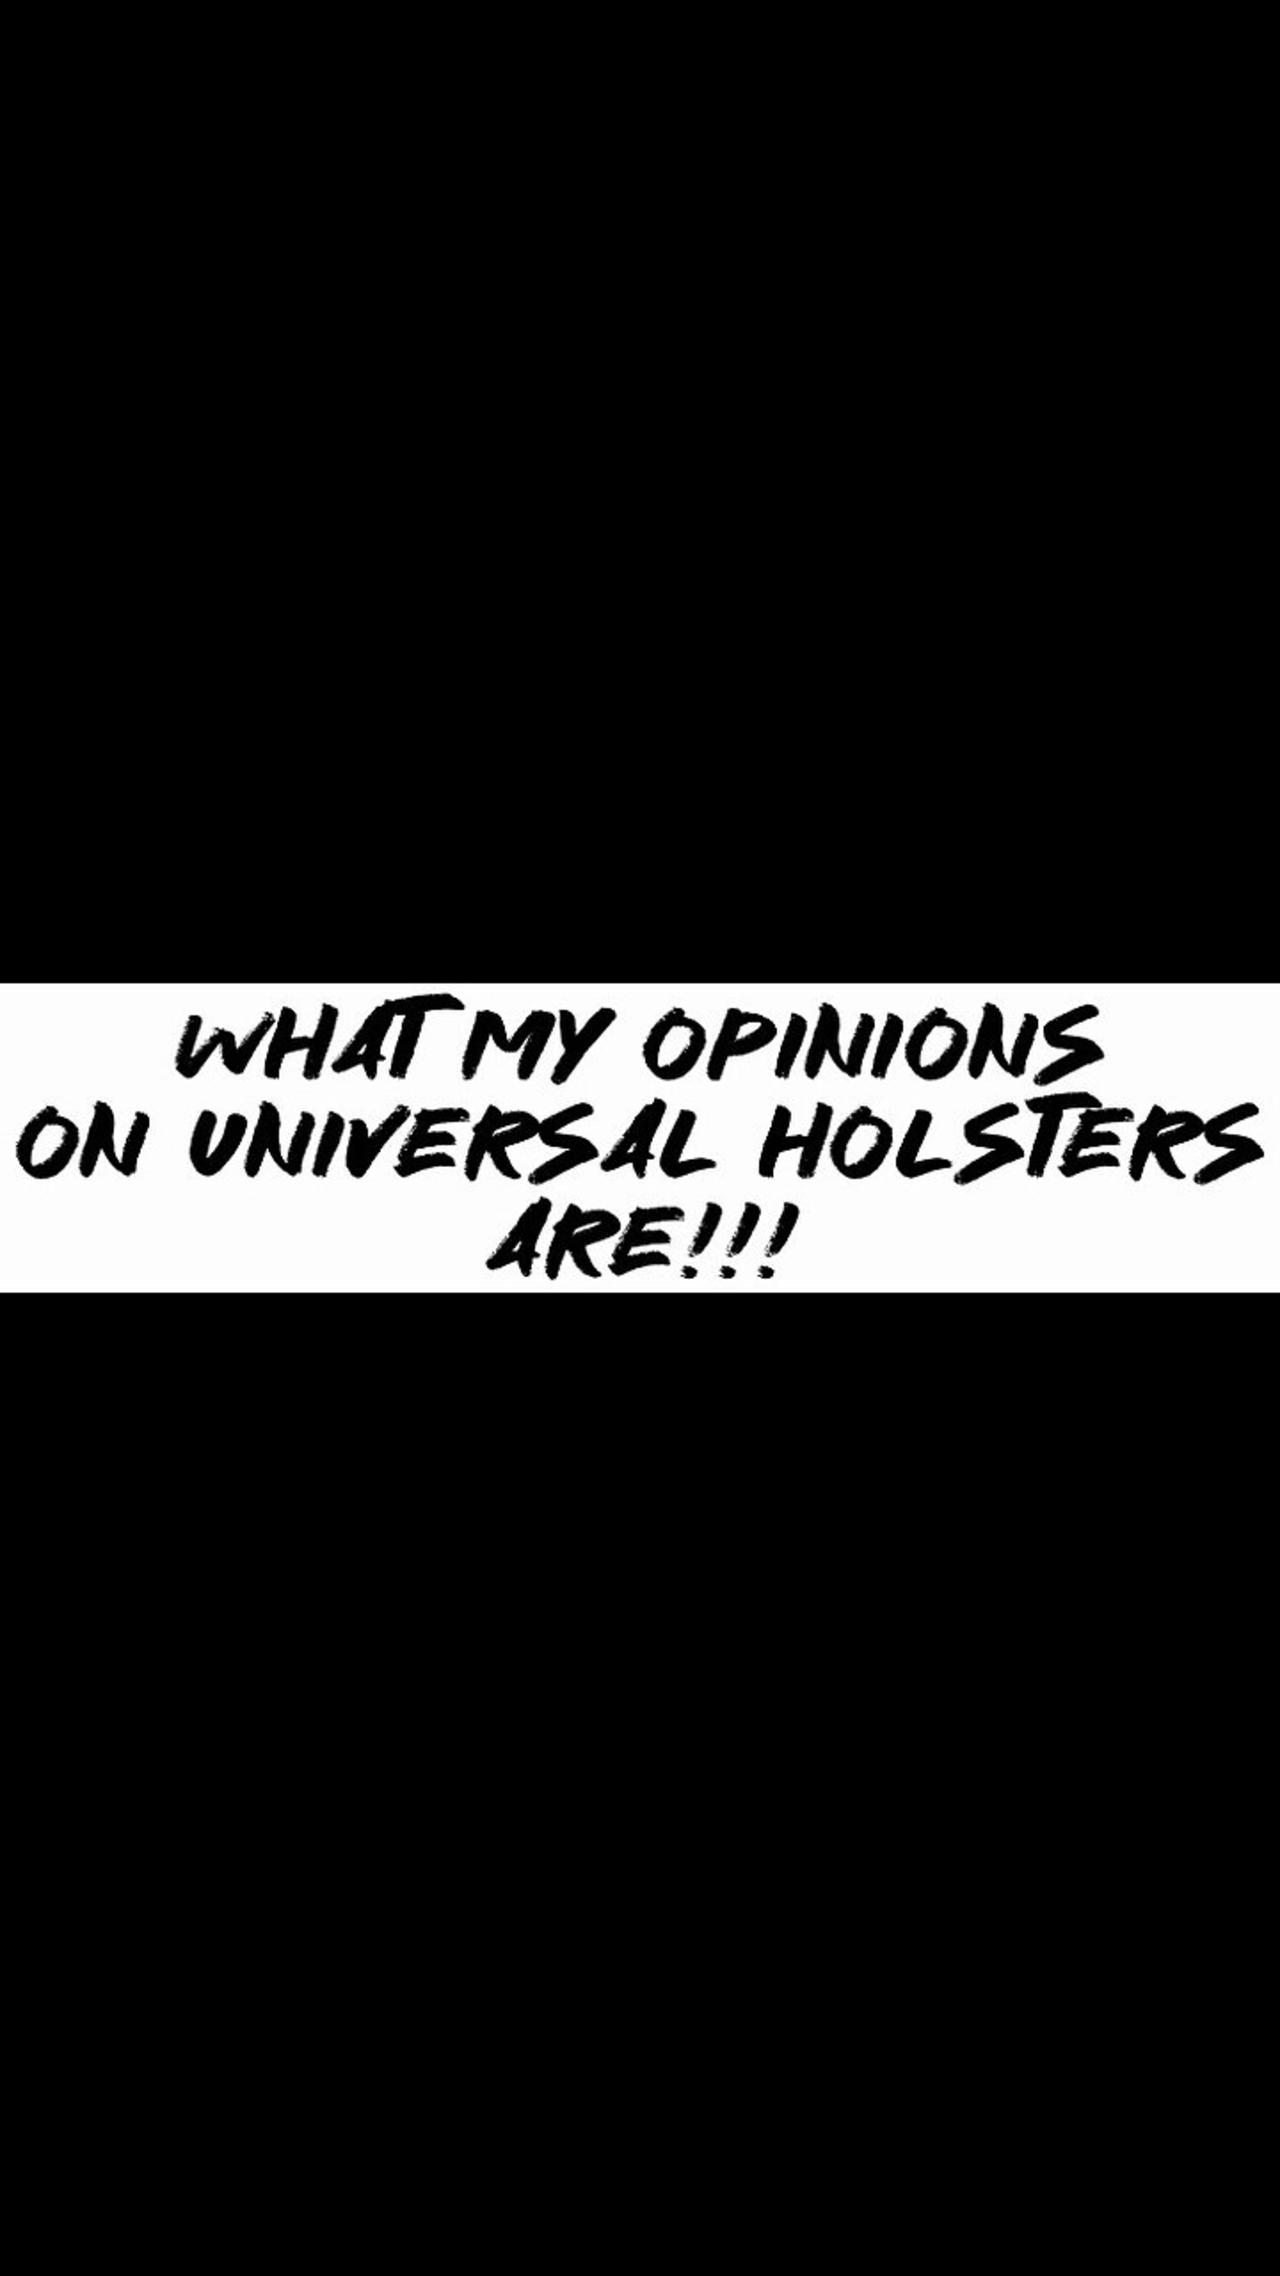 What my opinions on universal holsters are!!!